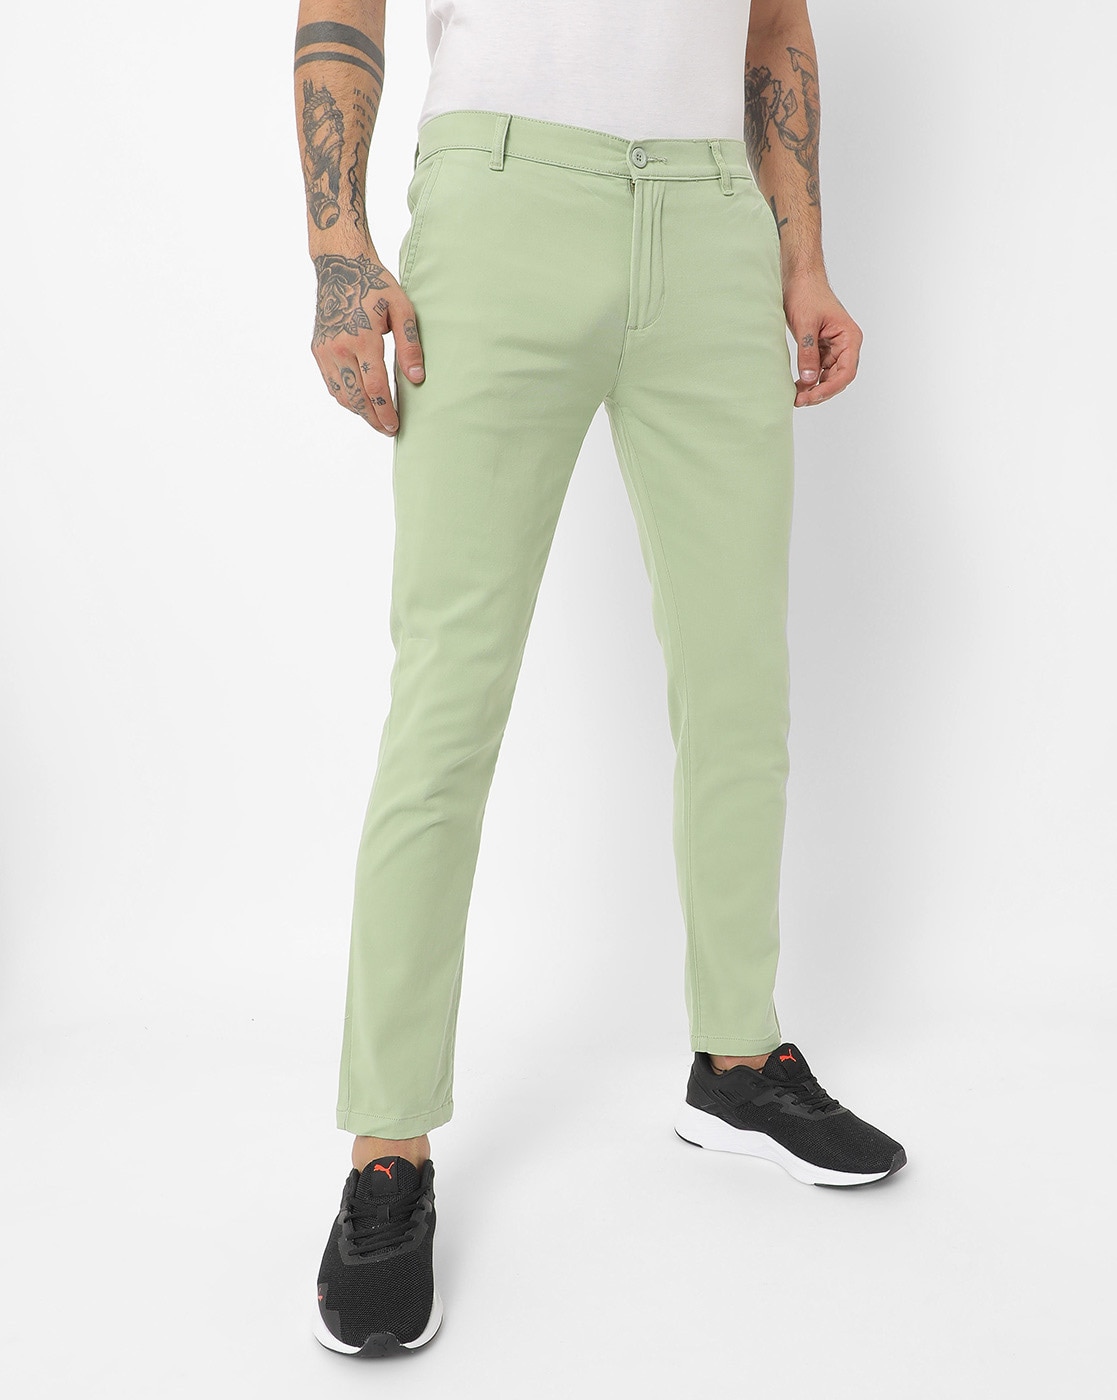 Mens Fully Stretchable Pista Green Pant trouser